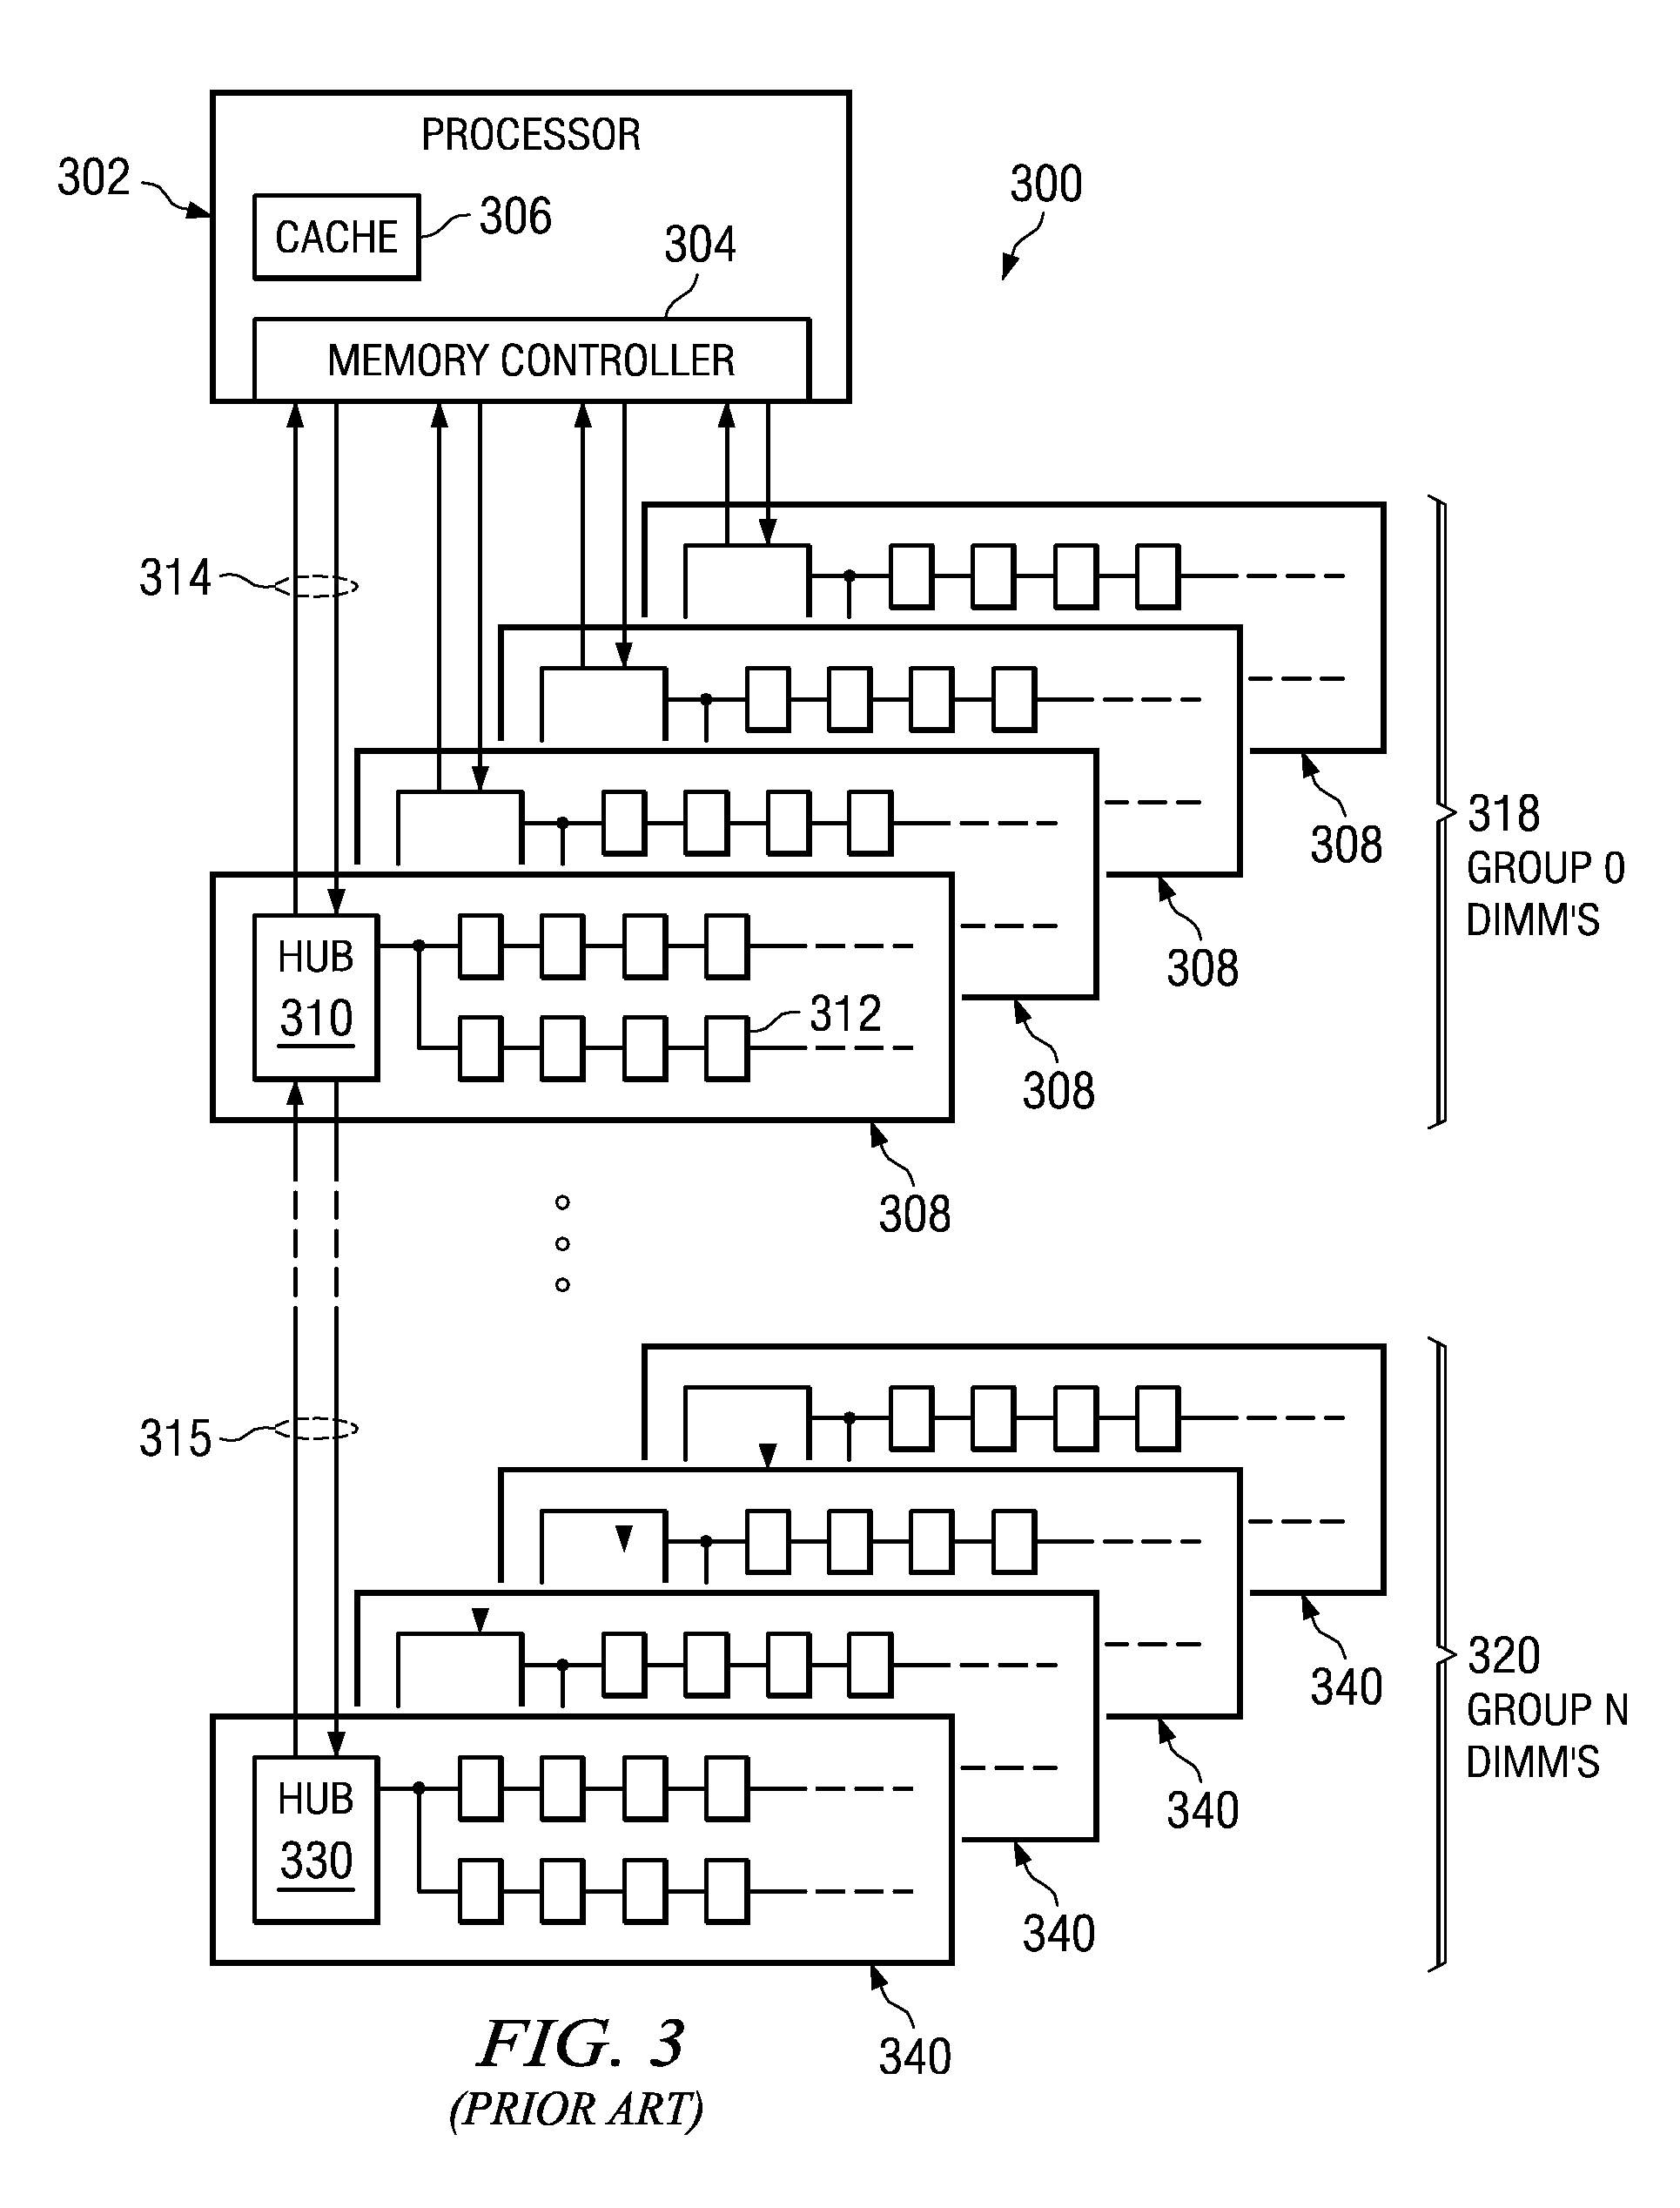 Method for Performing Error Correction Operations in a Memory Hub Device of a Memory Module